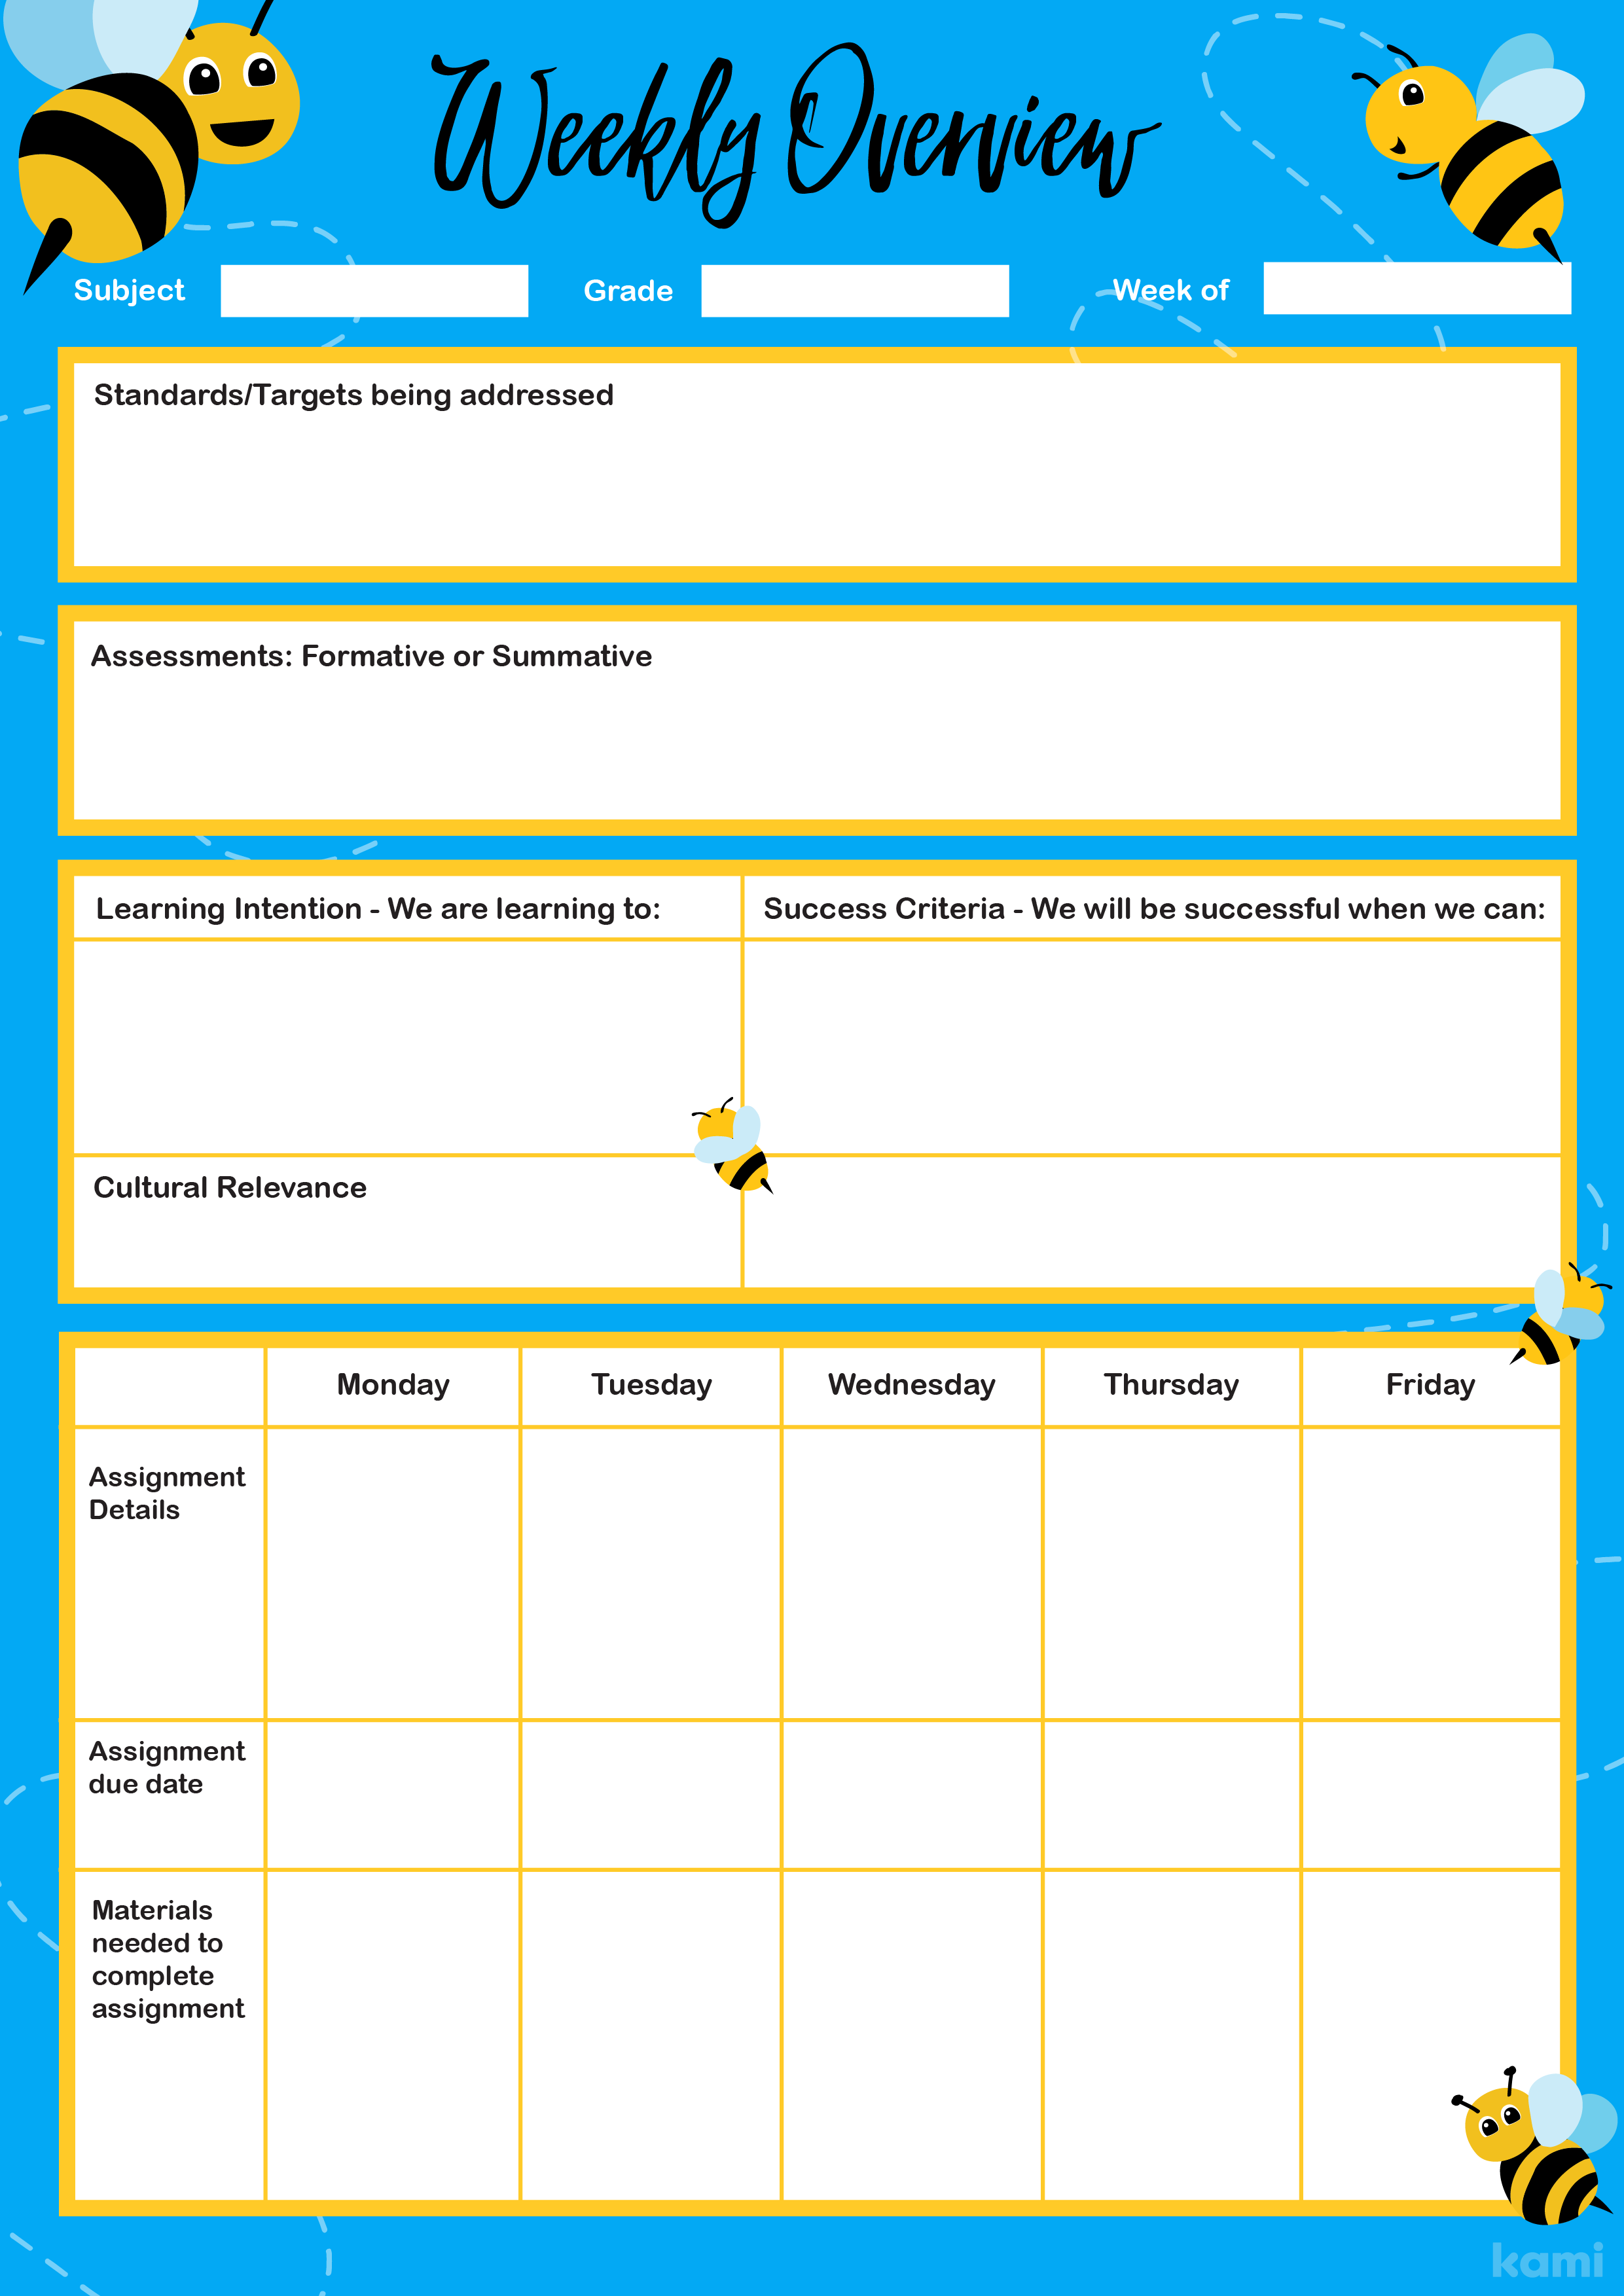 A Weekly Overview Lesson Plan for Teachers with a Busy Bee Theme